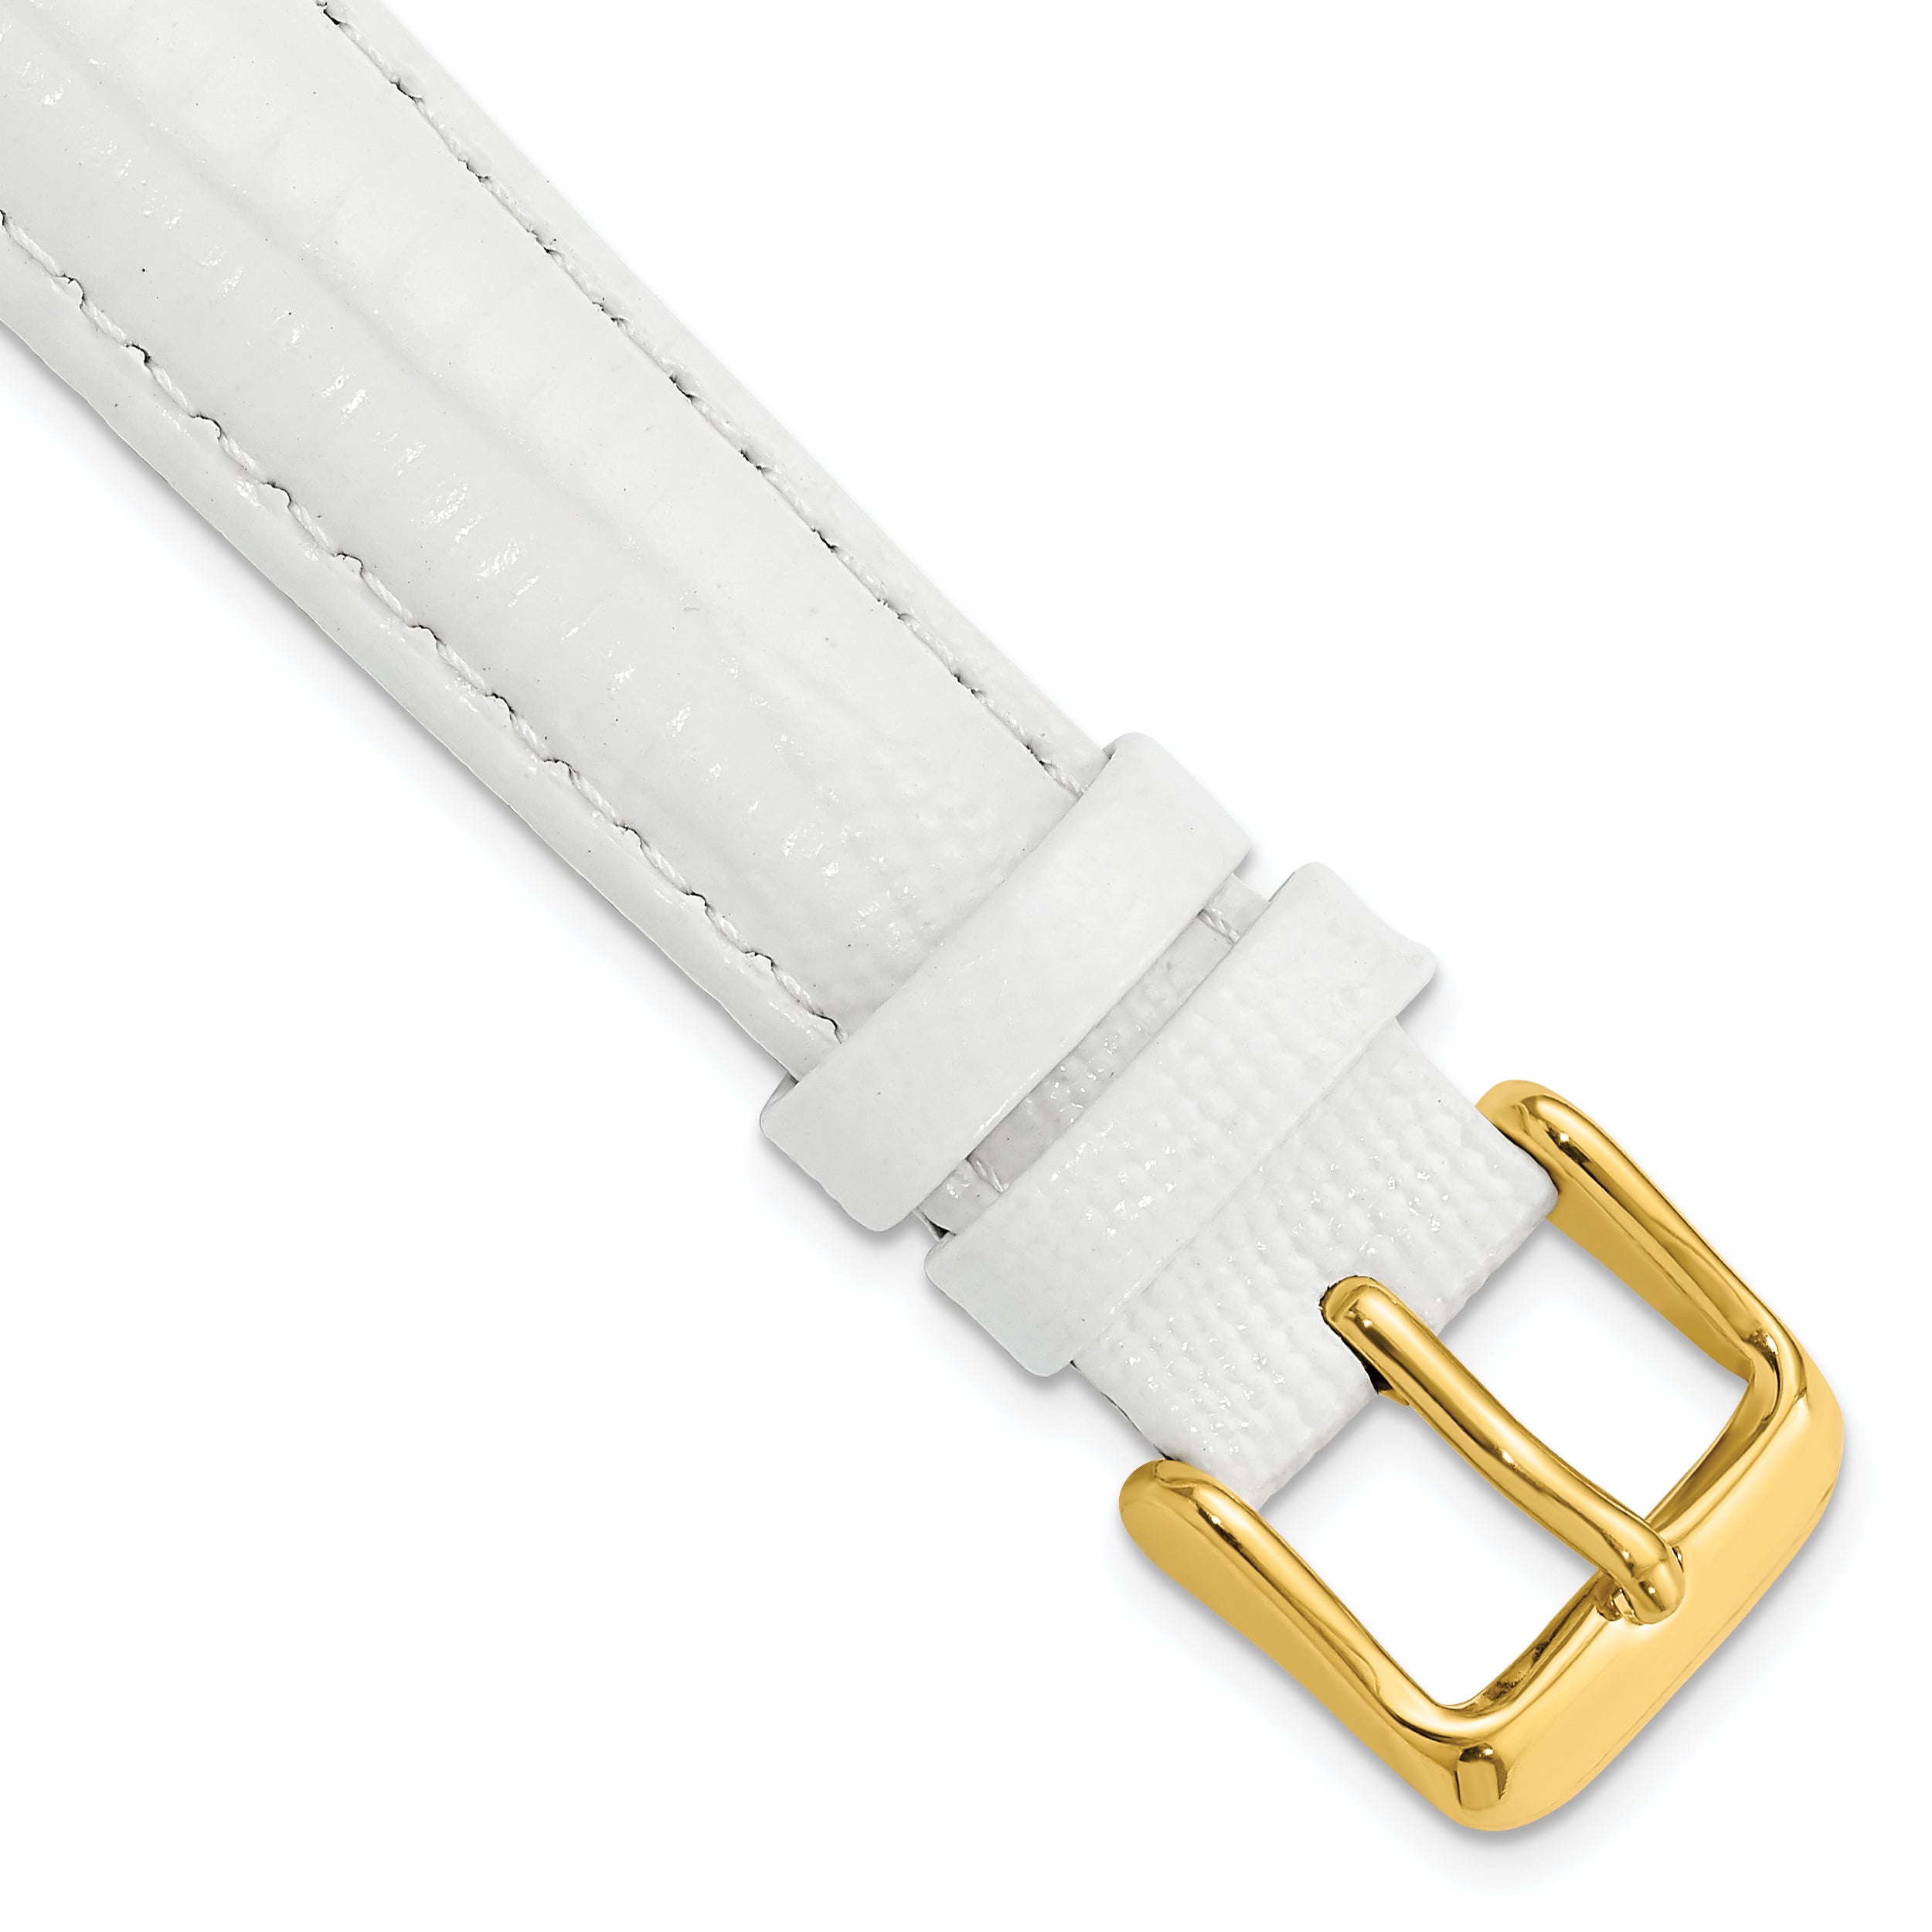 DeBeer 16mm White Teju Liz Grain Leather with Gold-tone Buckle 7.5 inch Watch Band